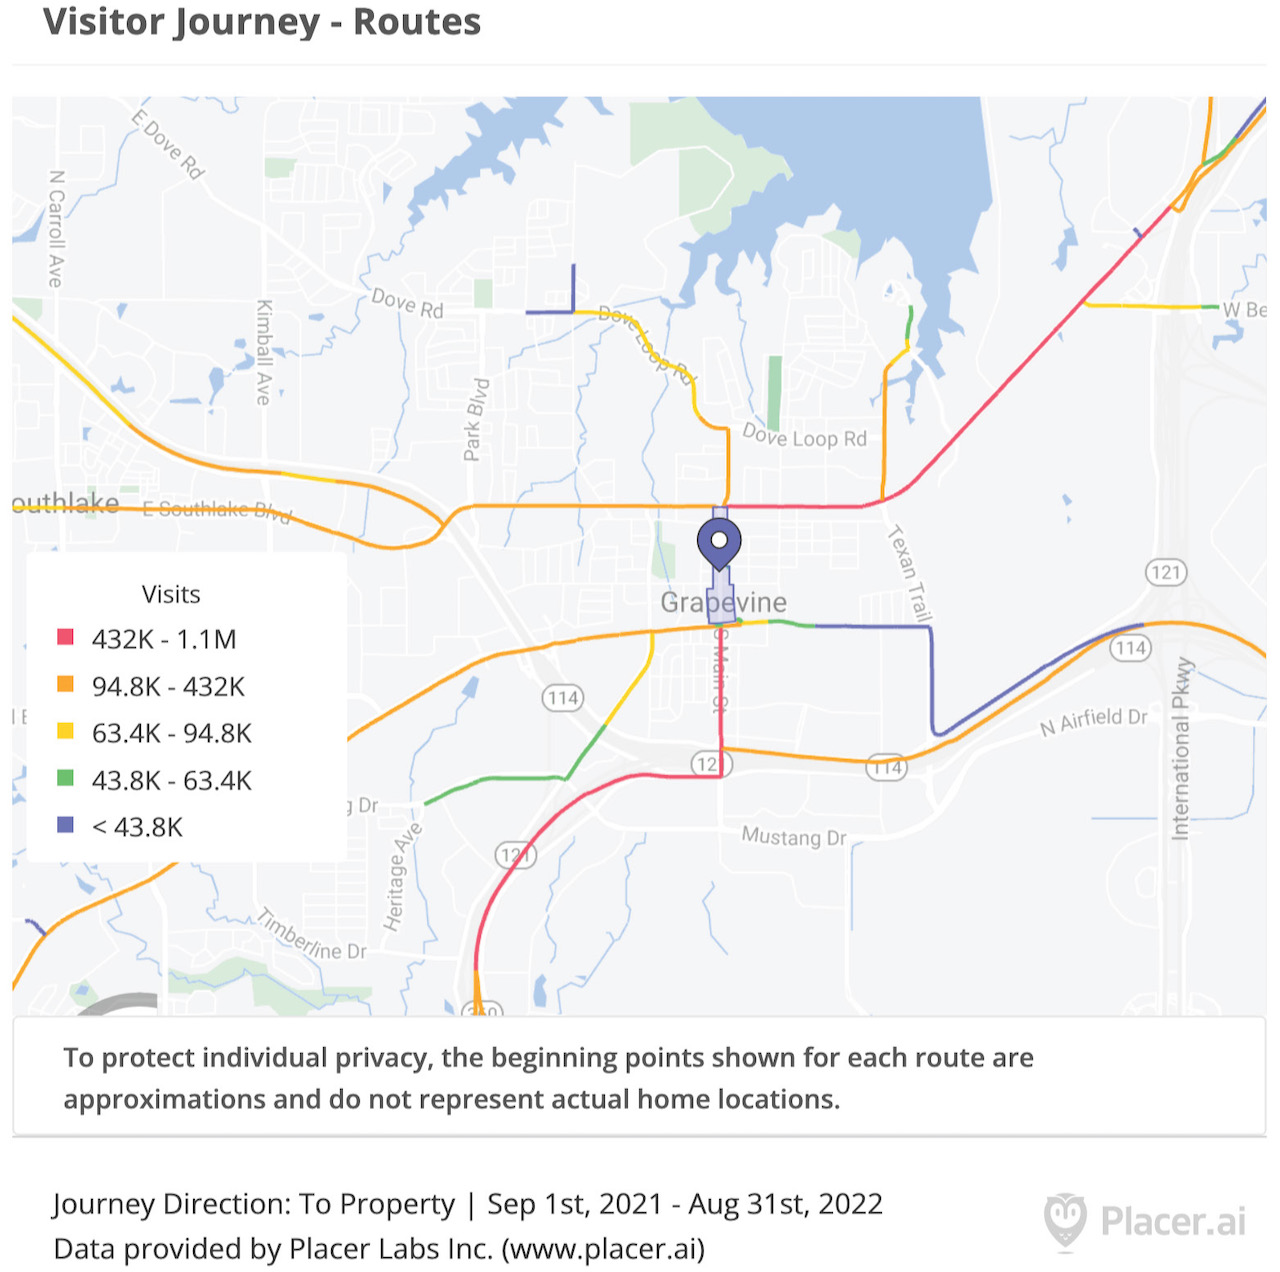 Visitor journeys to Main Street, estimated by Placer.ai, show a large portion of foot traffic in the historic district arriving via Northwest Highway and Dallas Road.